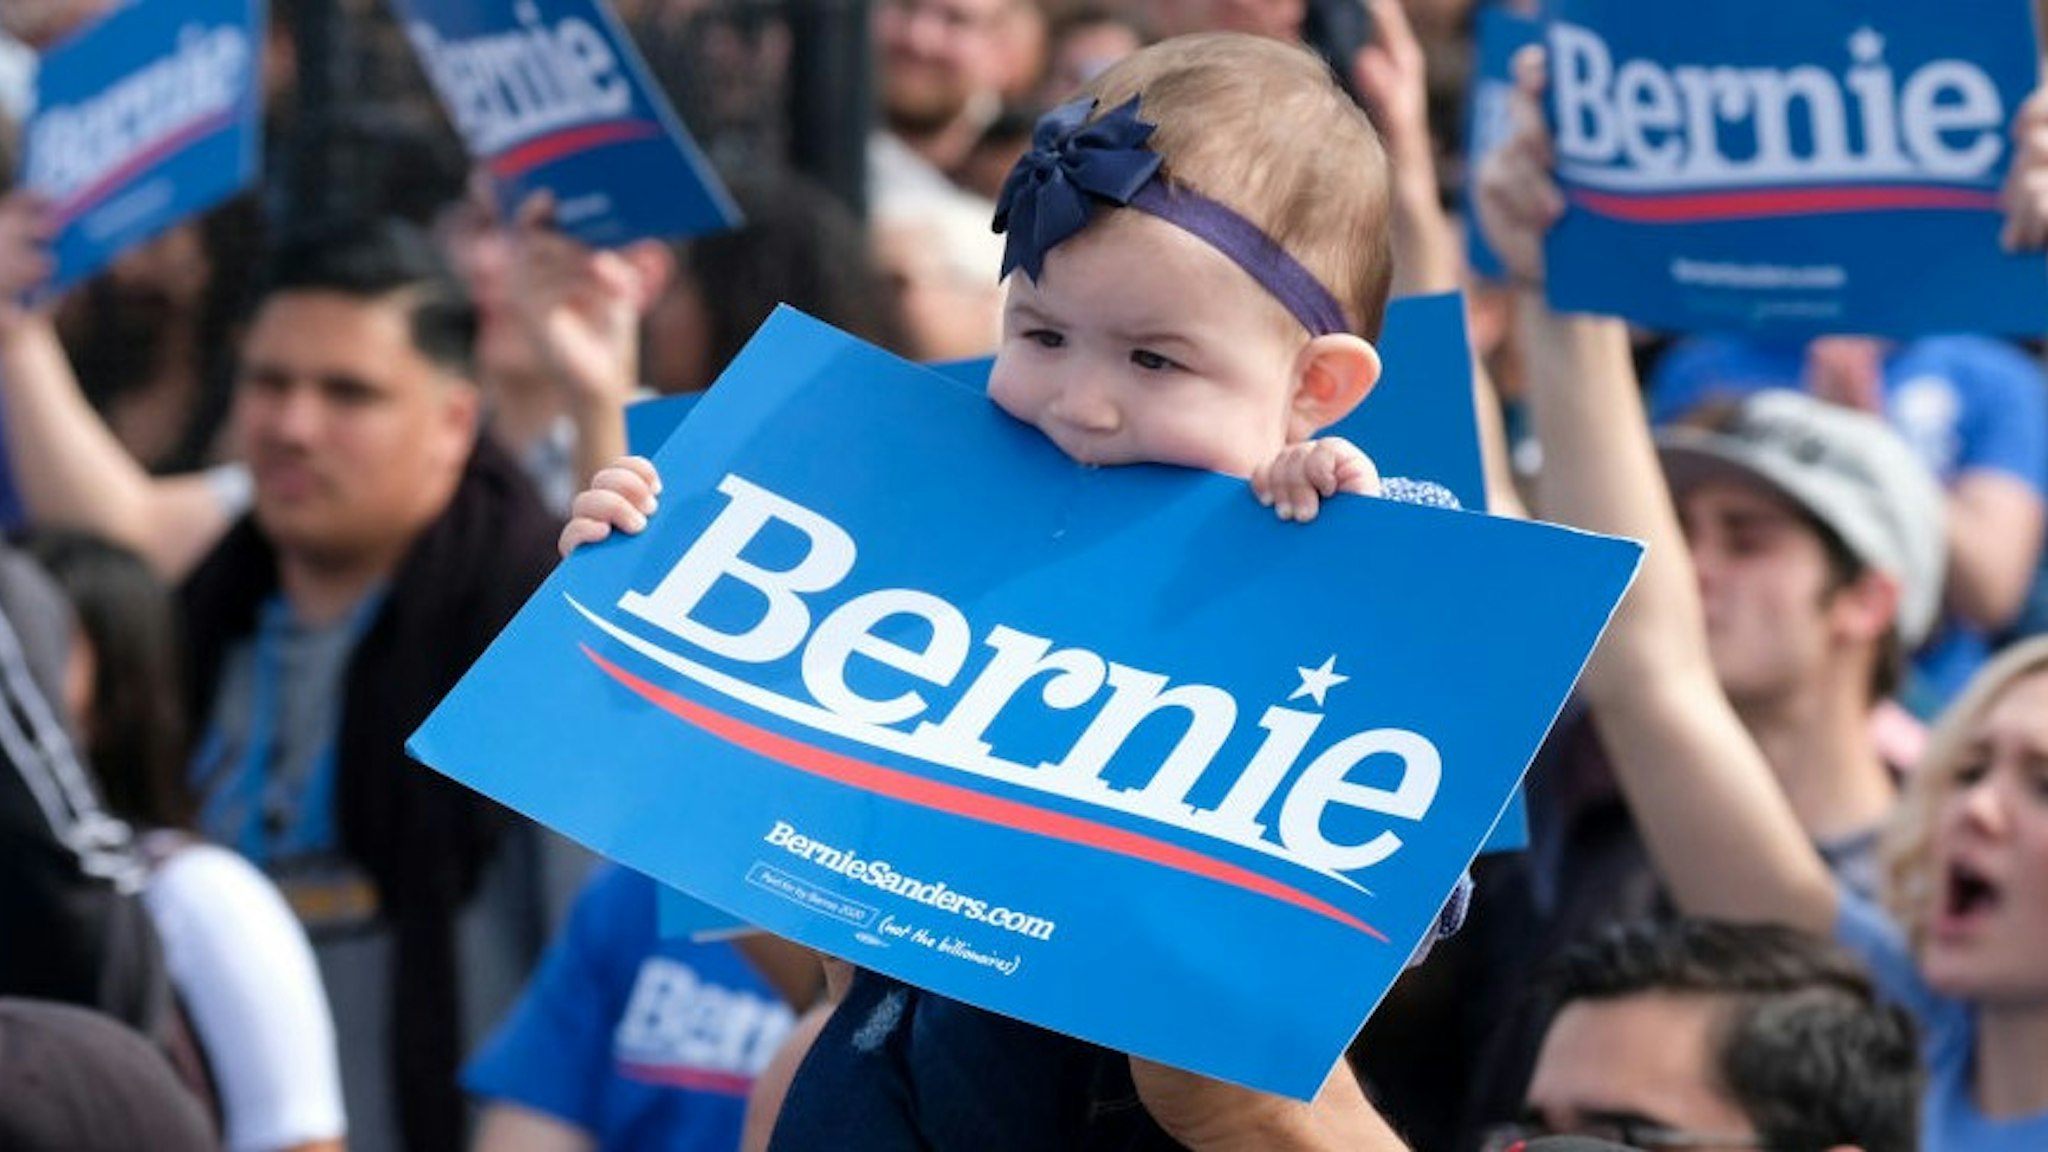 A supporter of Democratic presidential hopeful Vermont Senator Bernie Sanders (not pictured) holds up his baby during a rally at Valley High School in Santa Ana, California, February 21, 2020. (Photo by RINGO CHIU / AFP) (Photo by